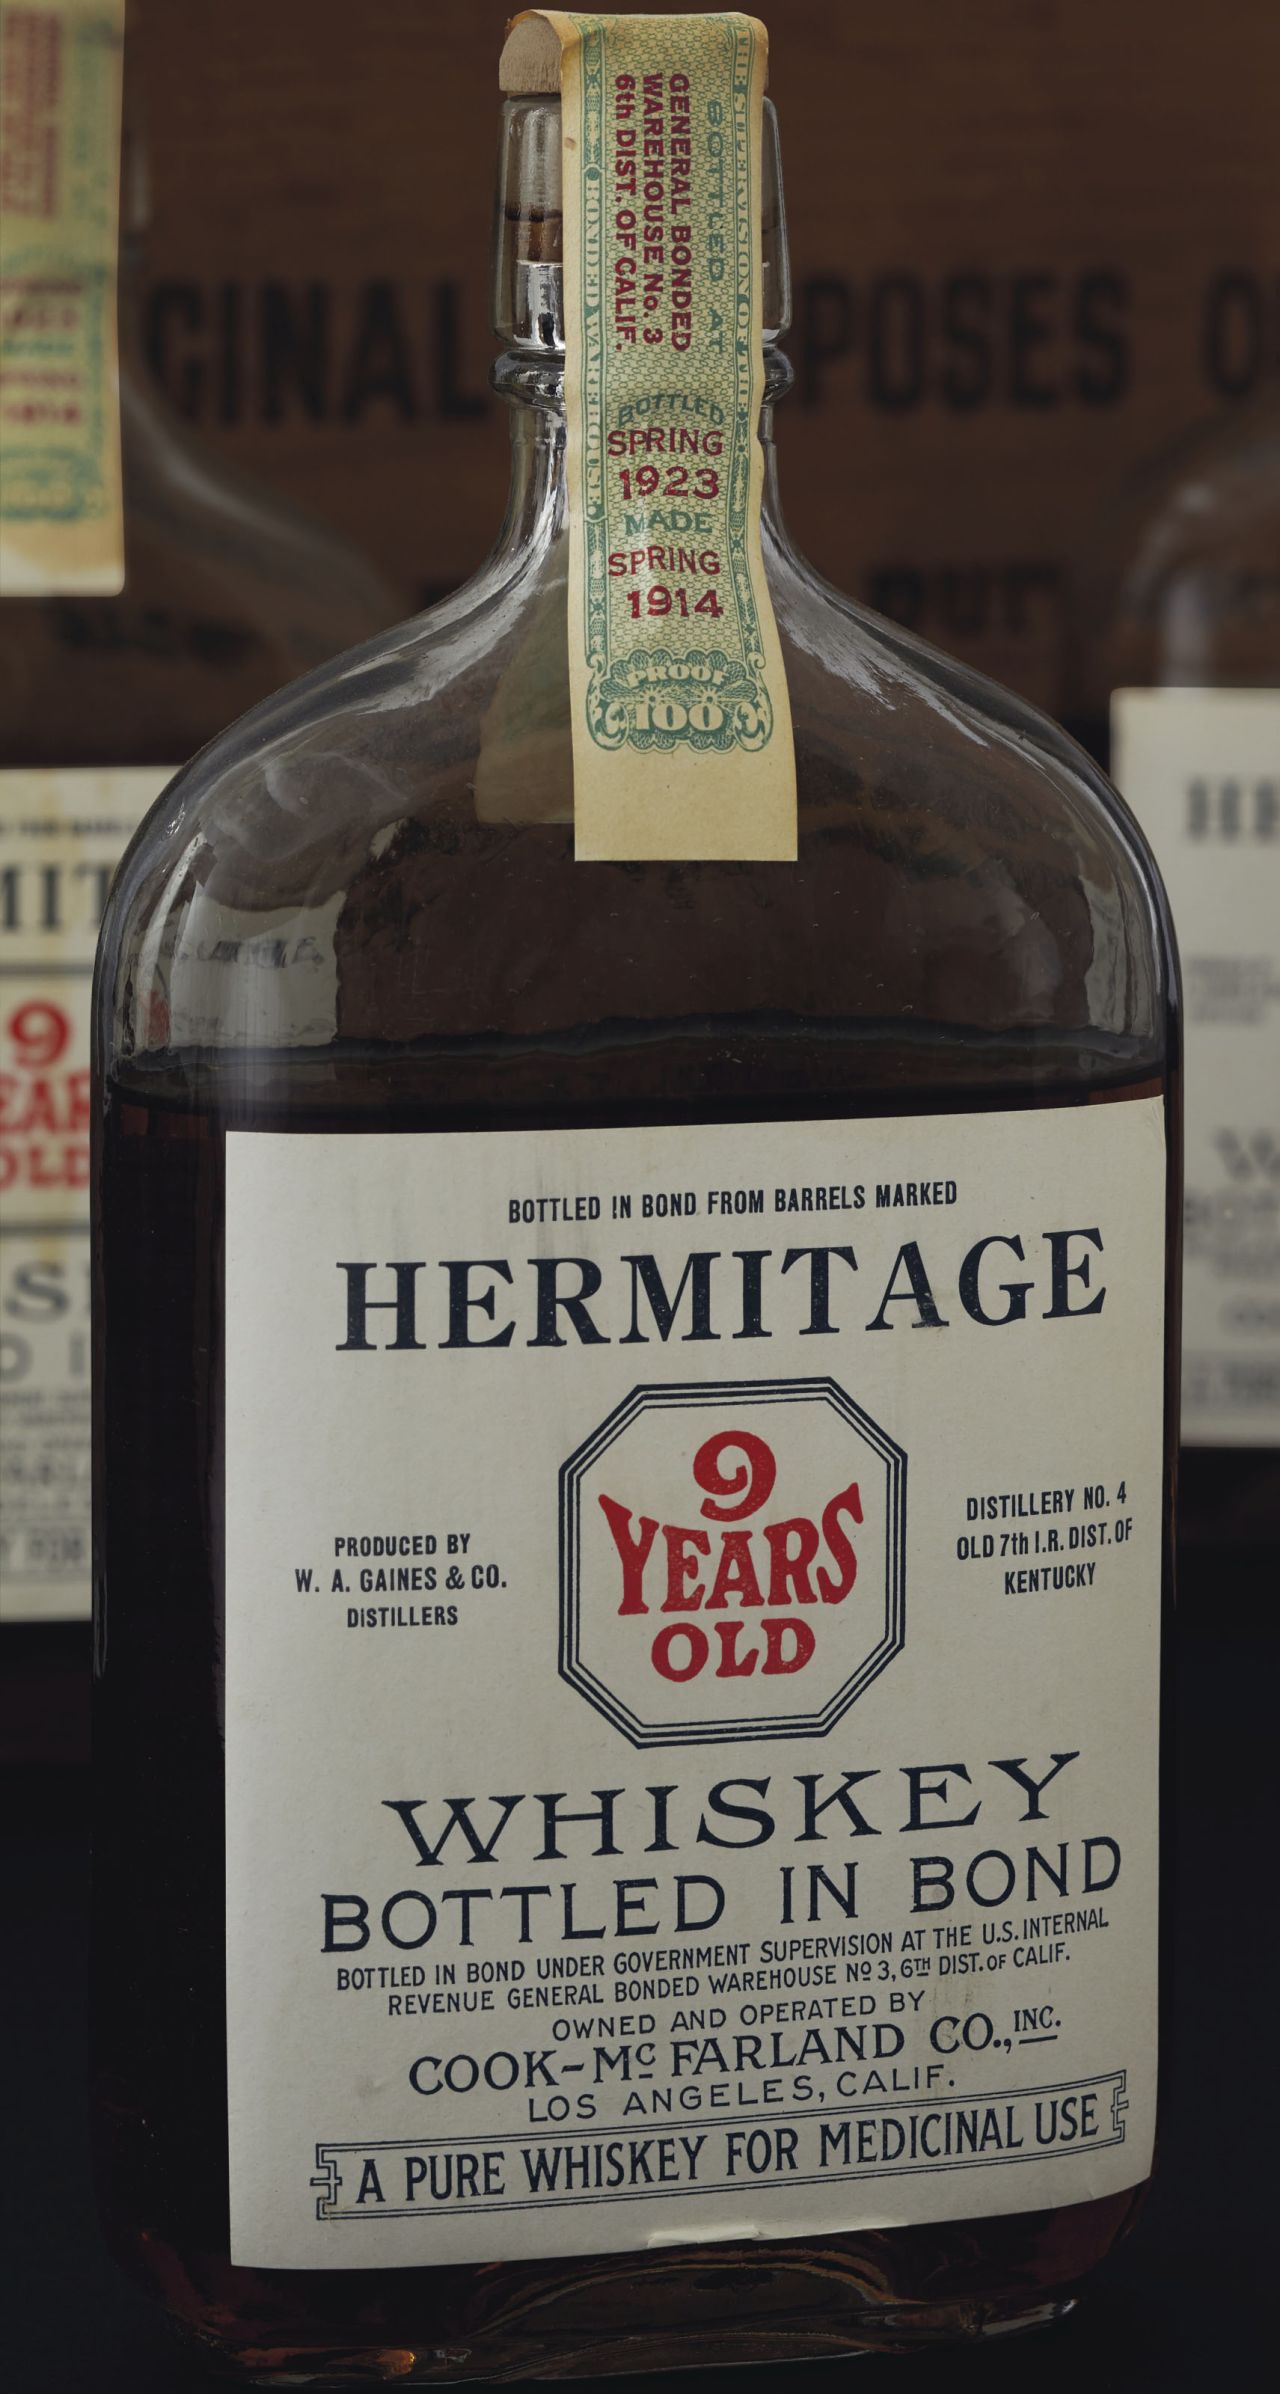 Christies will auction off 40 cases of unopened bonded whiskey bottled between 1908 and the 1930s, including a lot of Hermitage whiskey pints distilled around 1914.